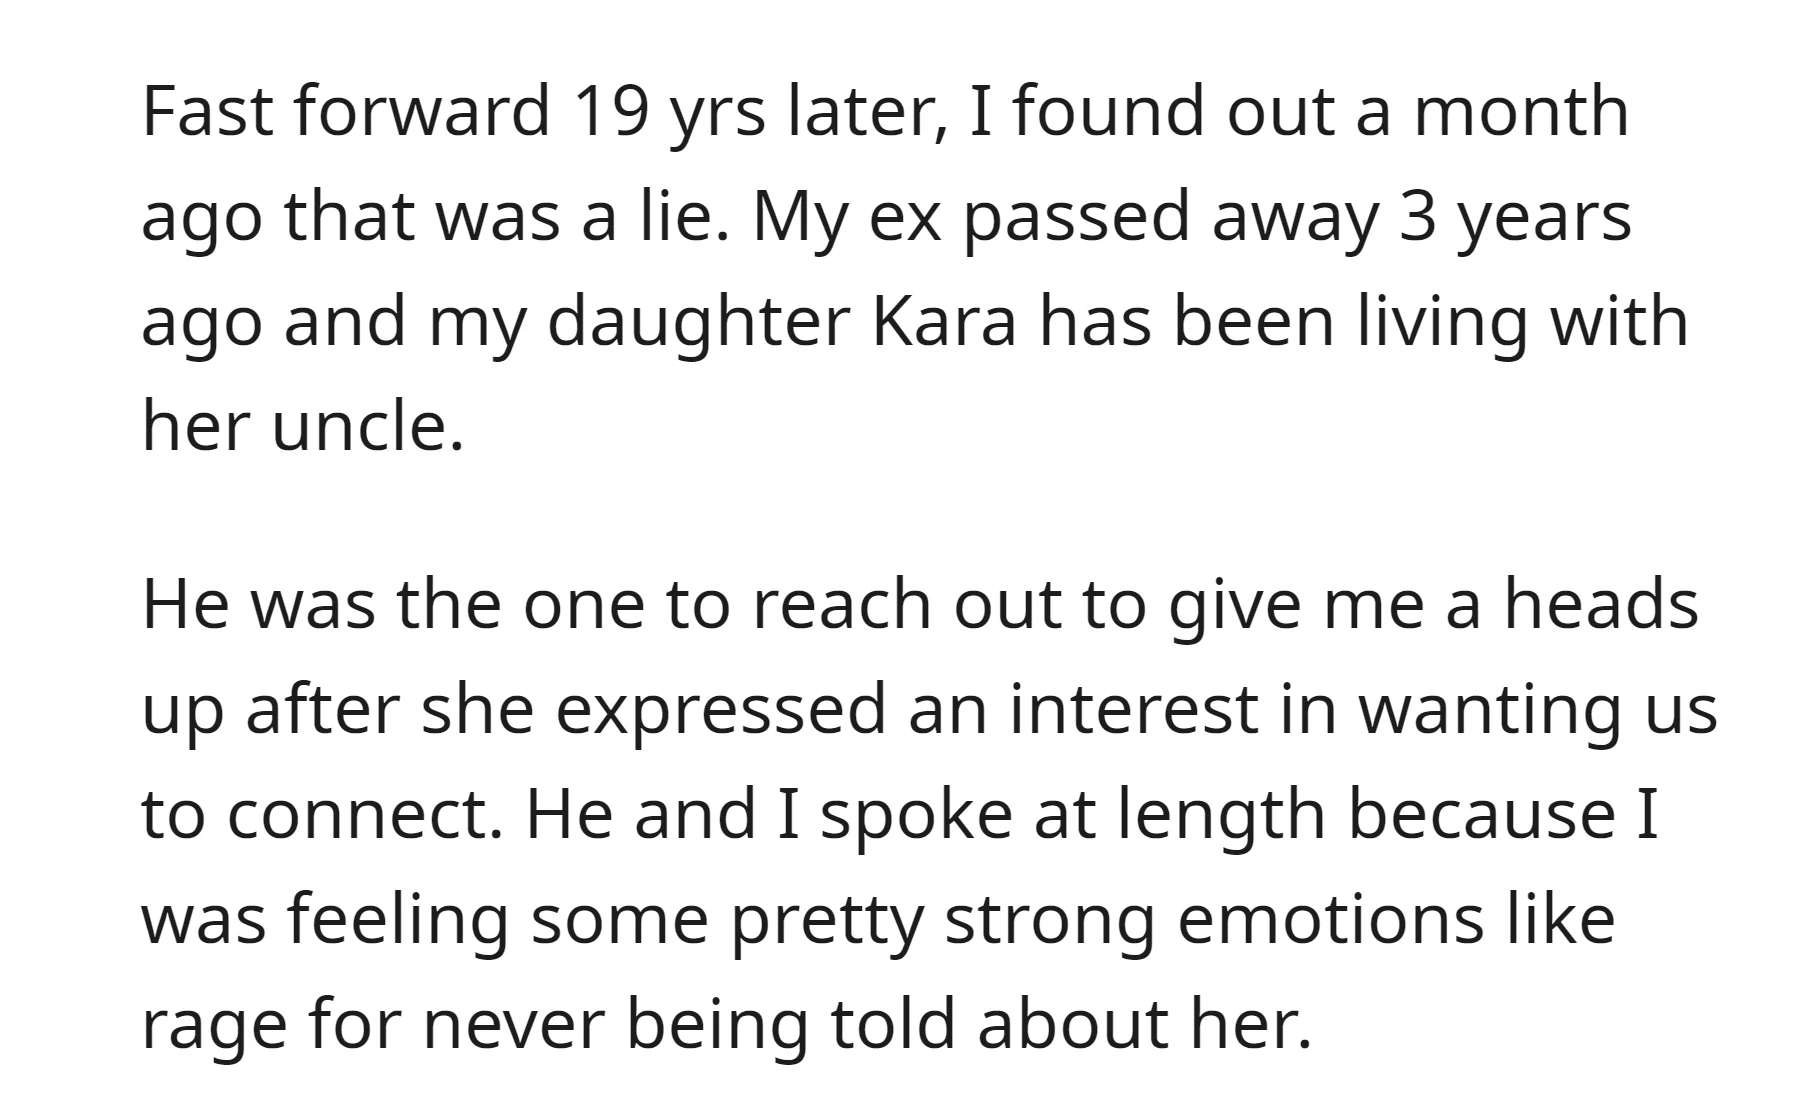 19 years later, OP found that his ex passed away and his daughter has lived with her uncle